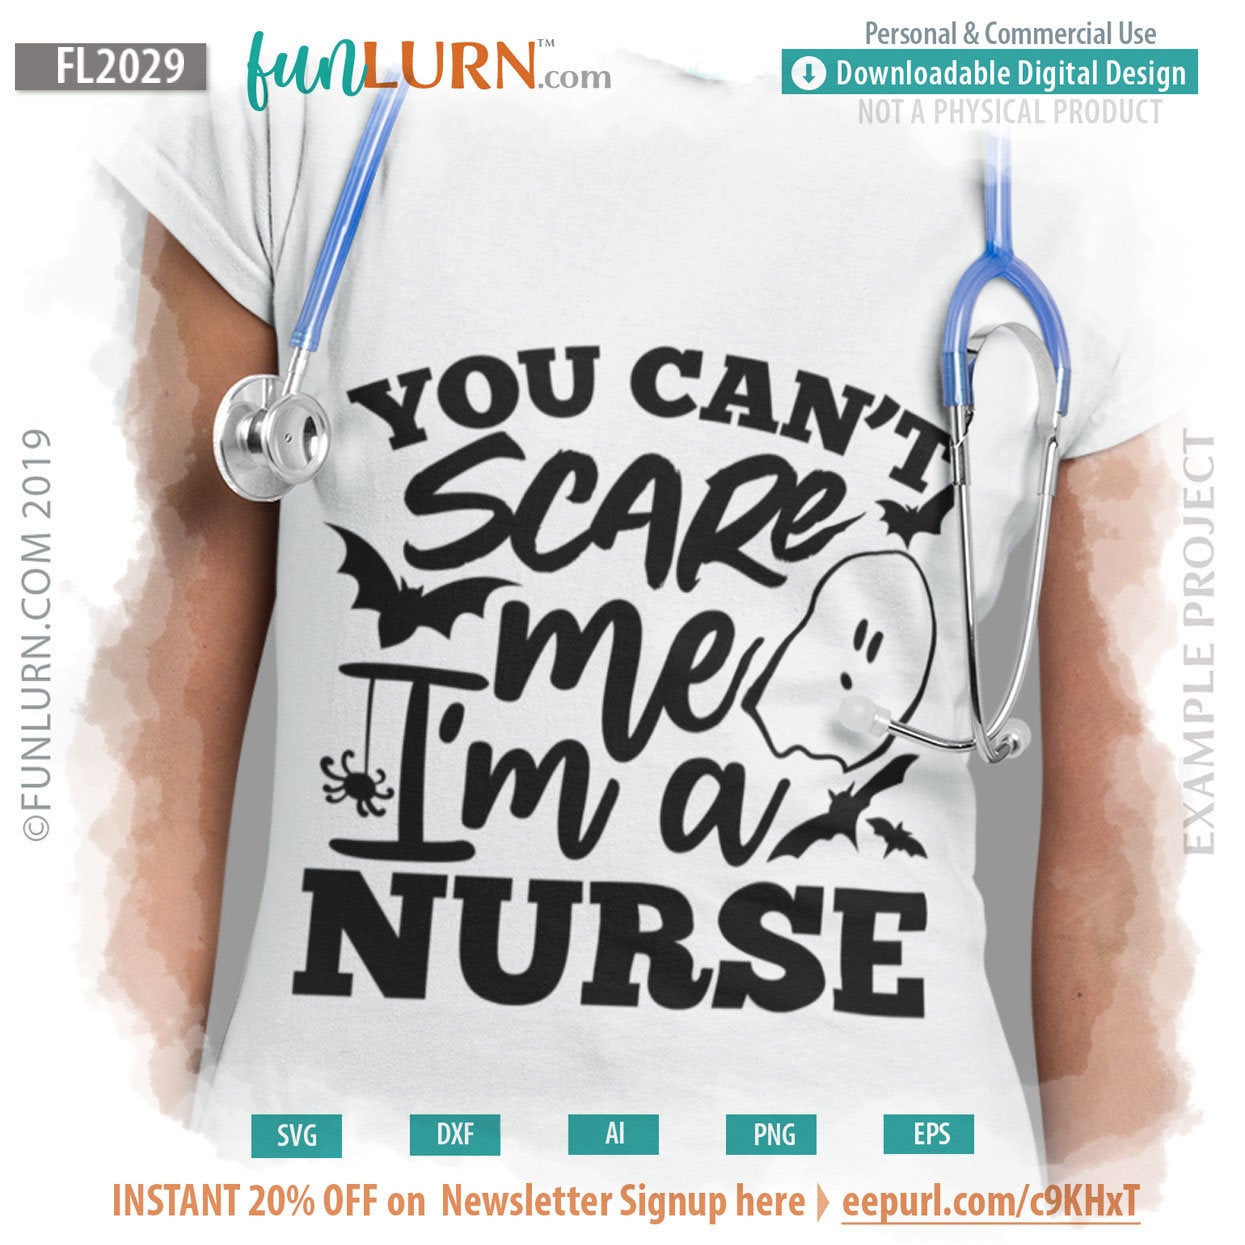 Download You cant scare me I am a nurse - FunLurn